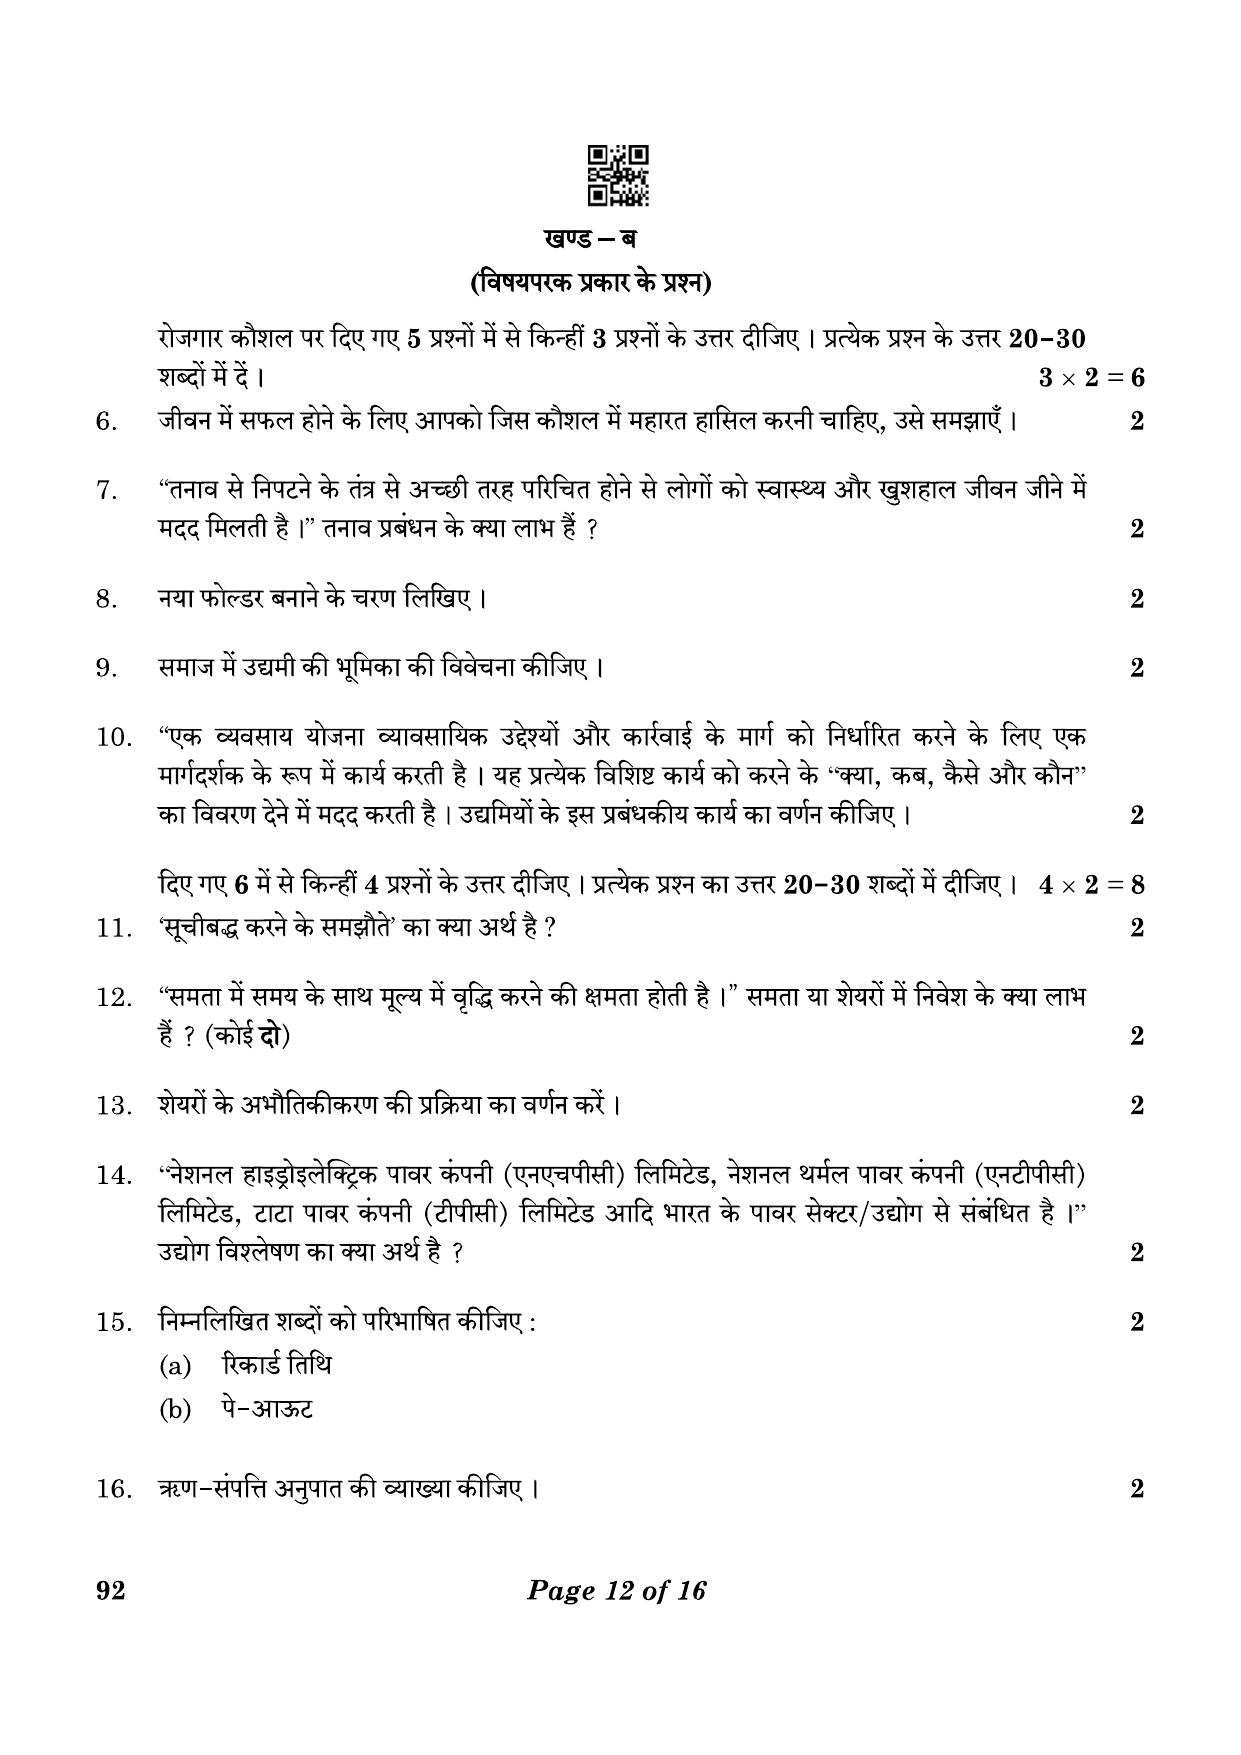 CBSE Class 10 92 Introduction To Financial Markets 2023 Question Paper - Page 12